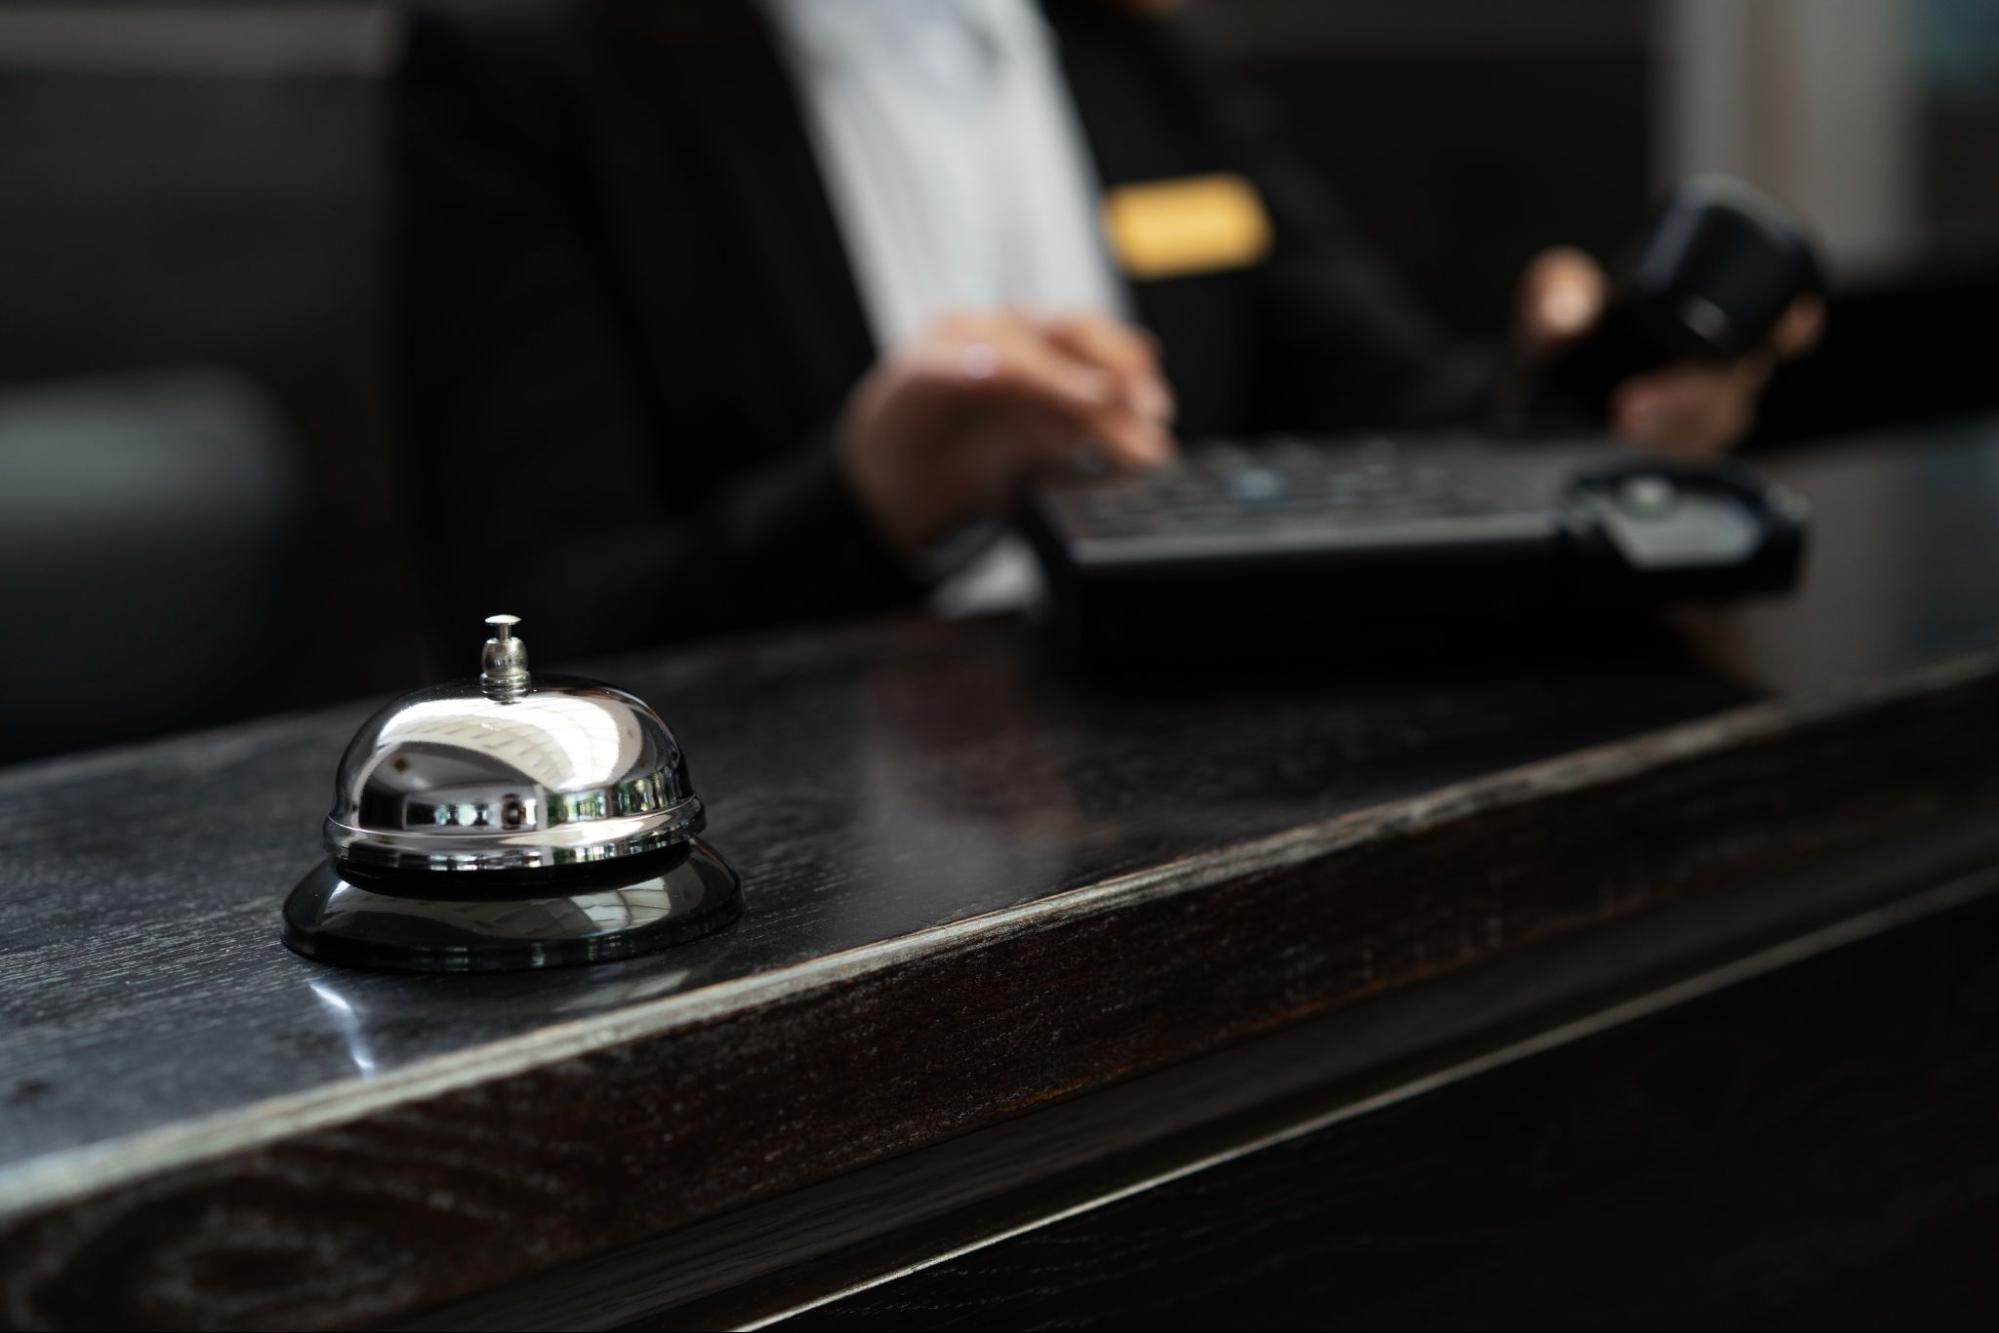 A hotel receptionist at the desk